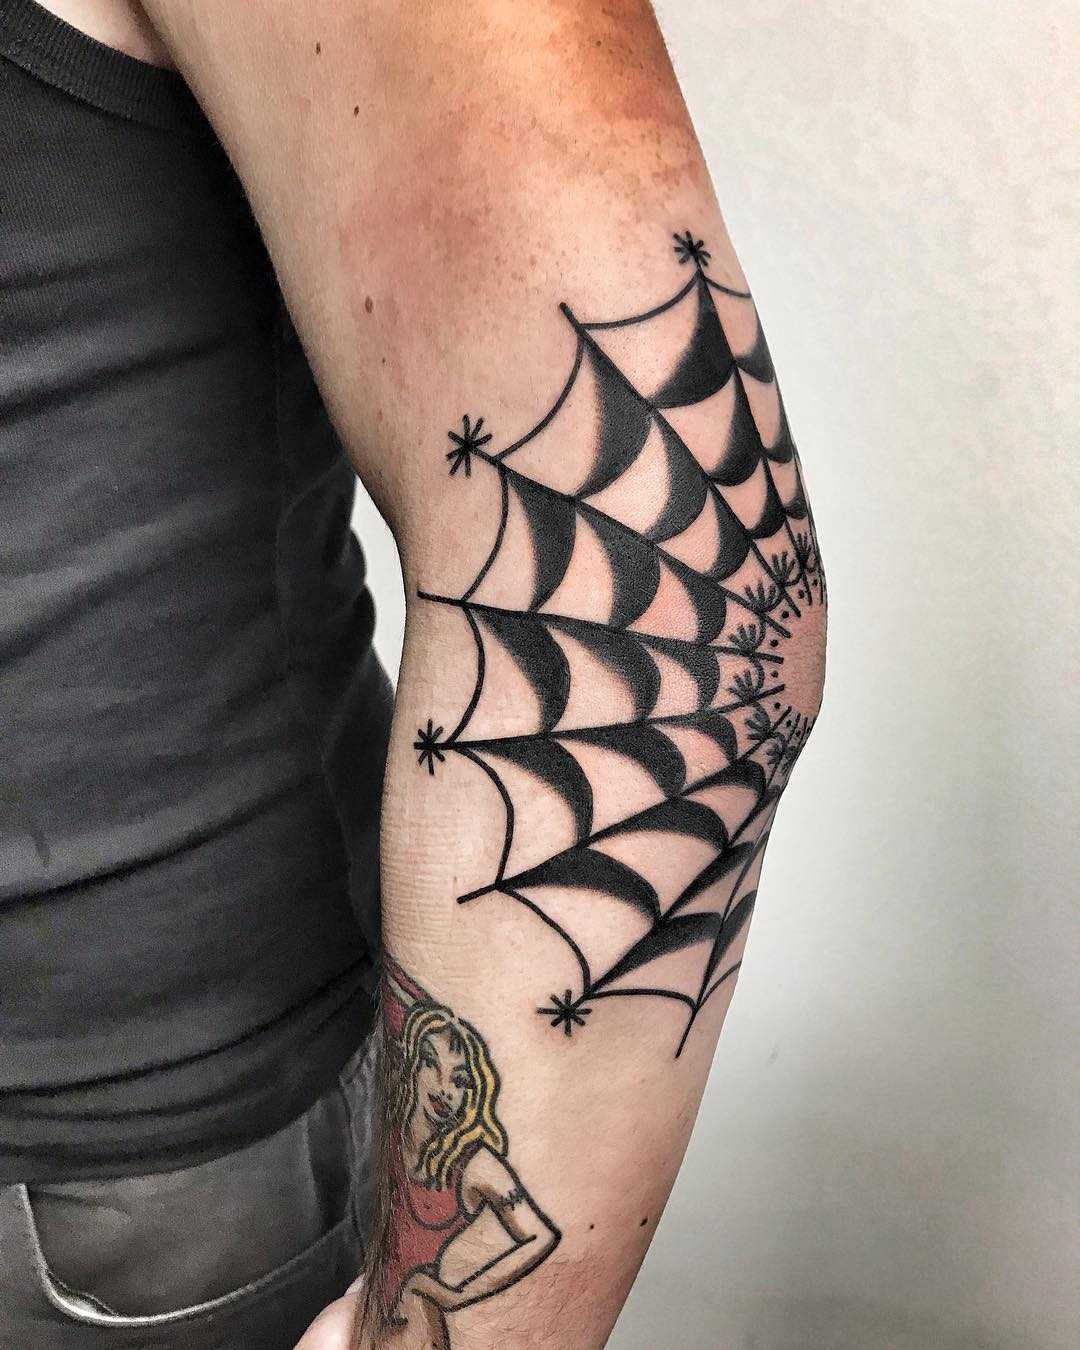 A black spider web by Mike Nofuck